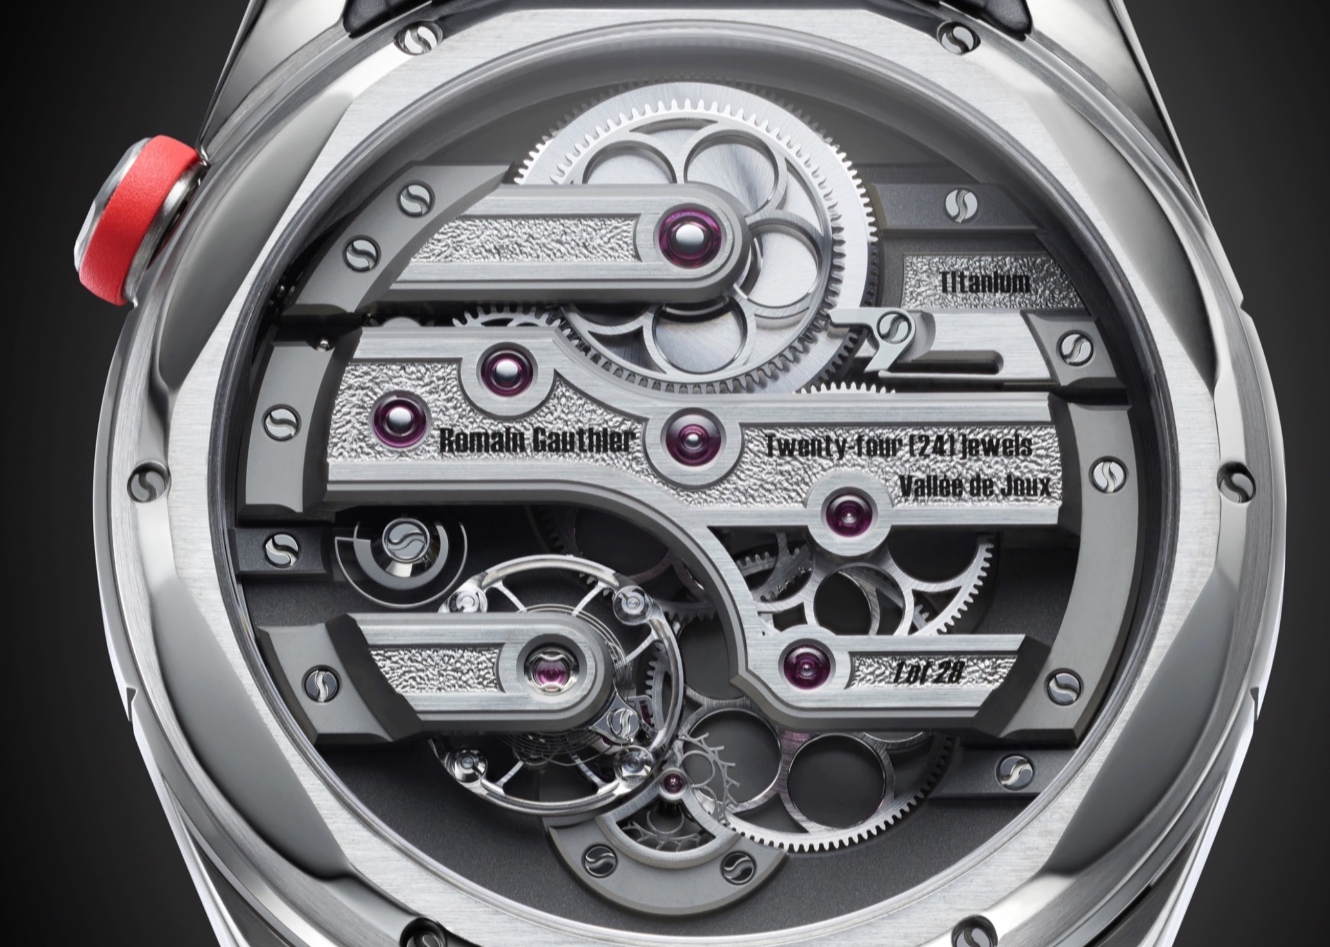 Romain Gauthier presents the first edition of Continuum